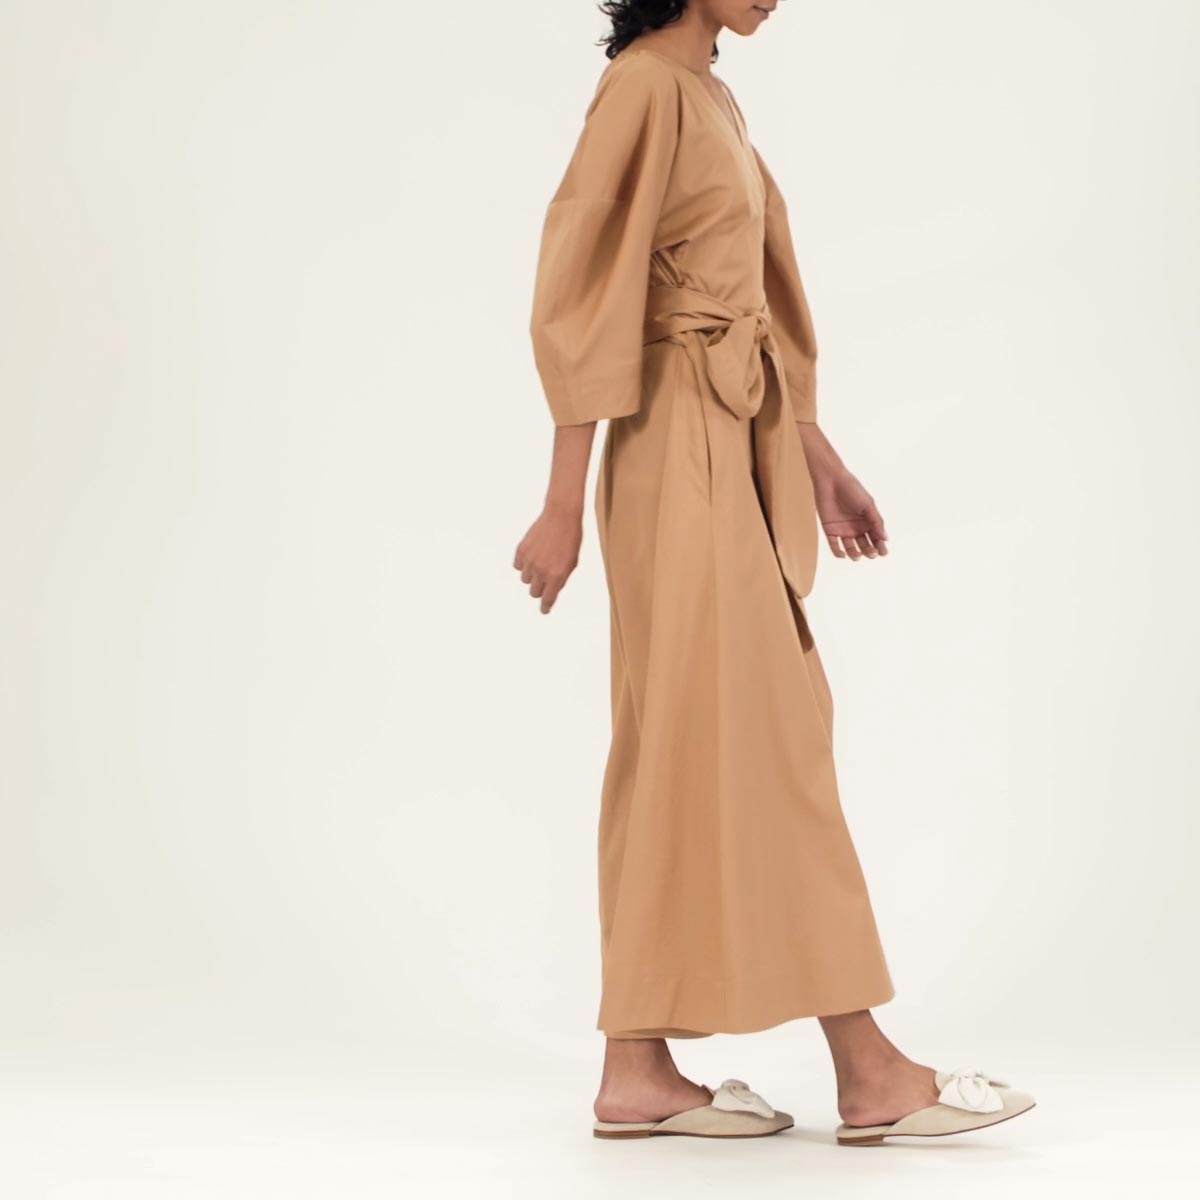 The Mule in Linen shown on model styled with a tan long sleeve midi dress with a tied belt.